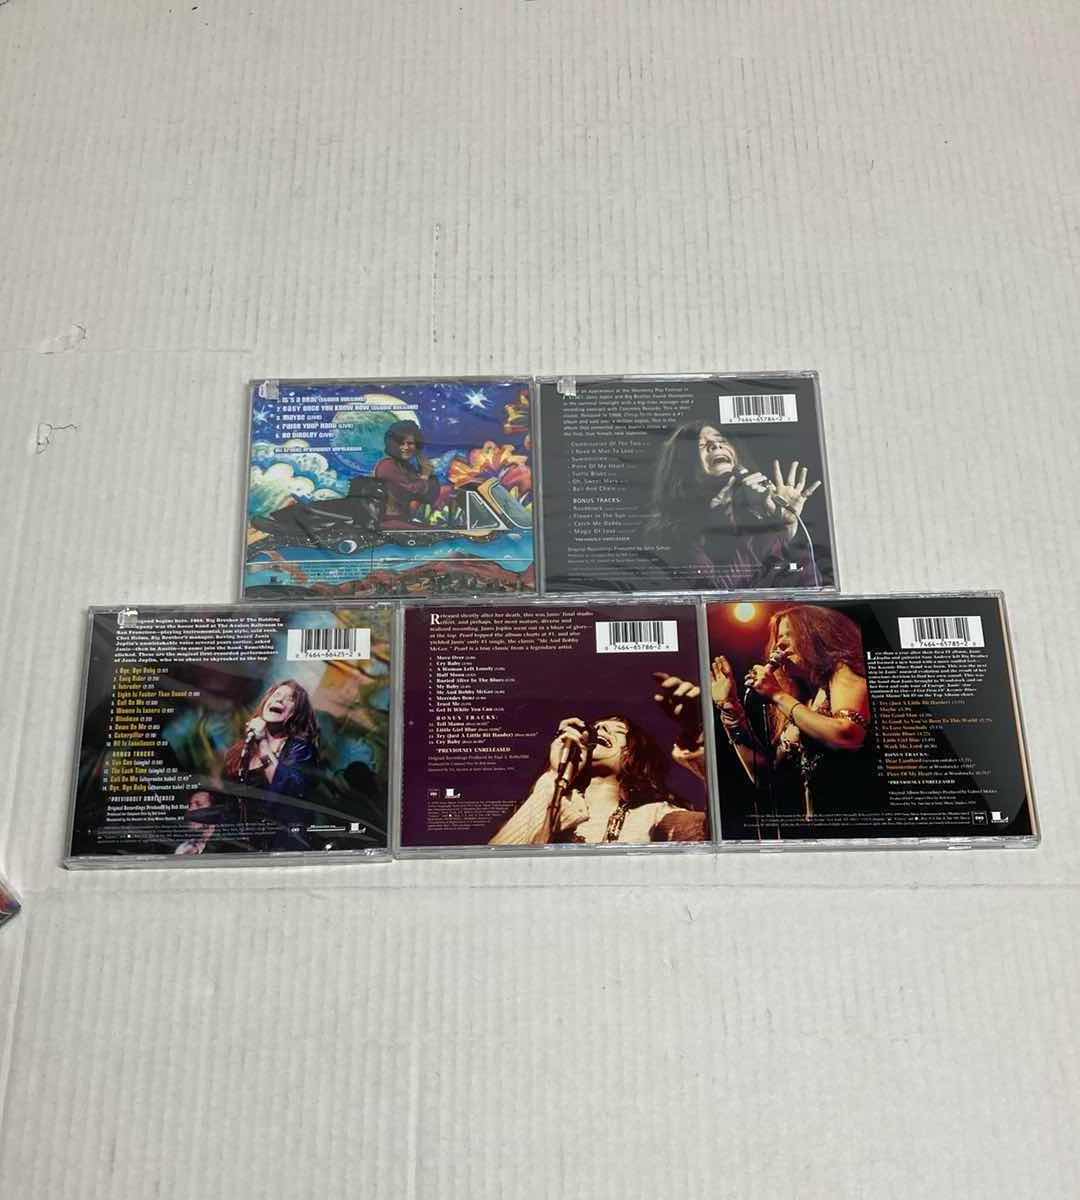 Photo 3 of JANIS JOPLIN COLLECTION BOX OF PEARLS DISC SET